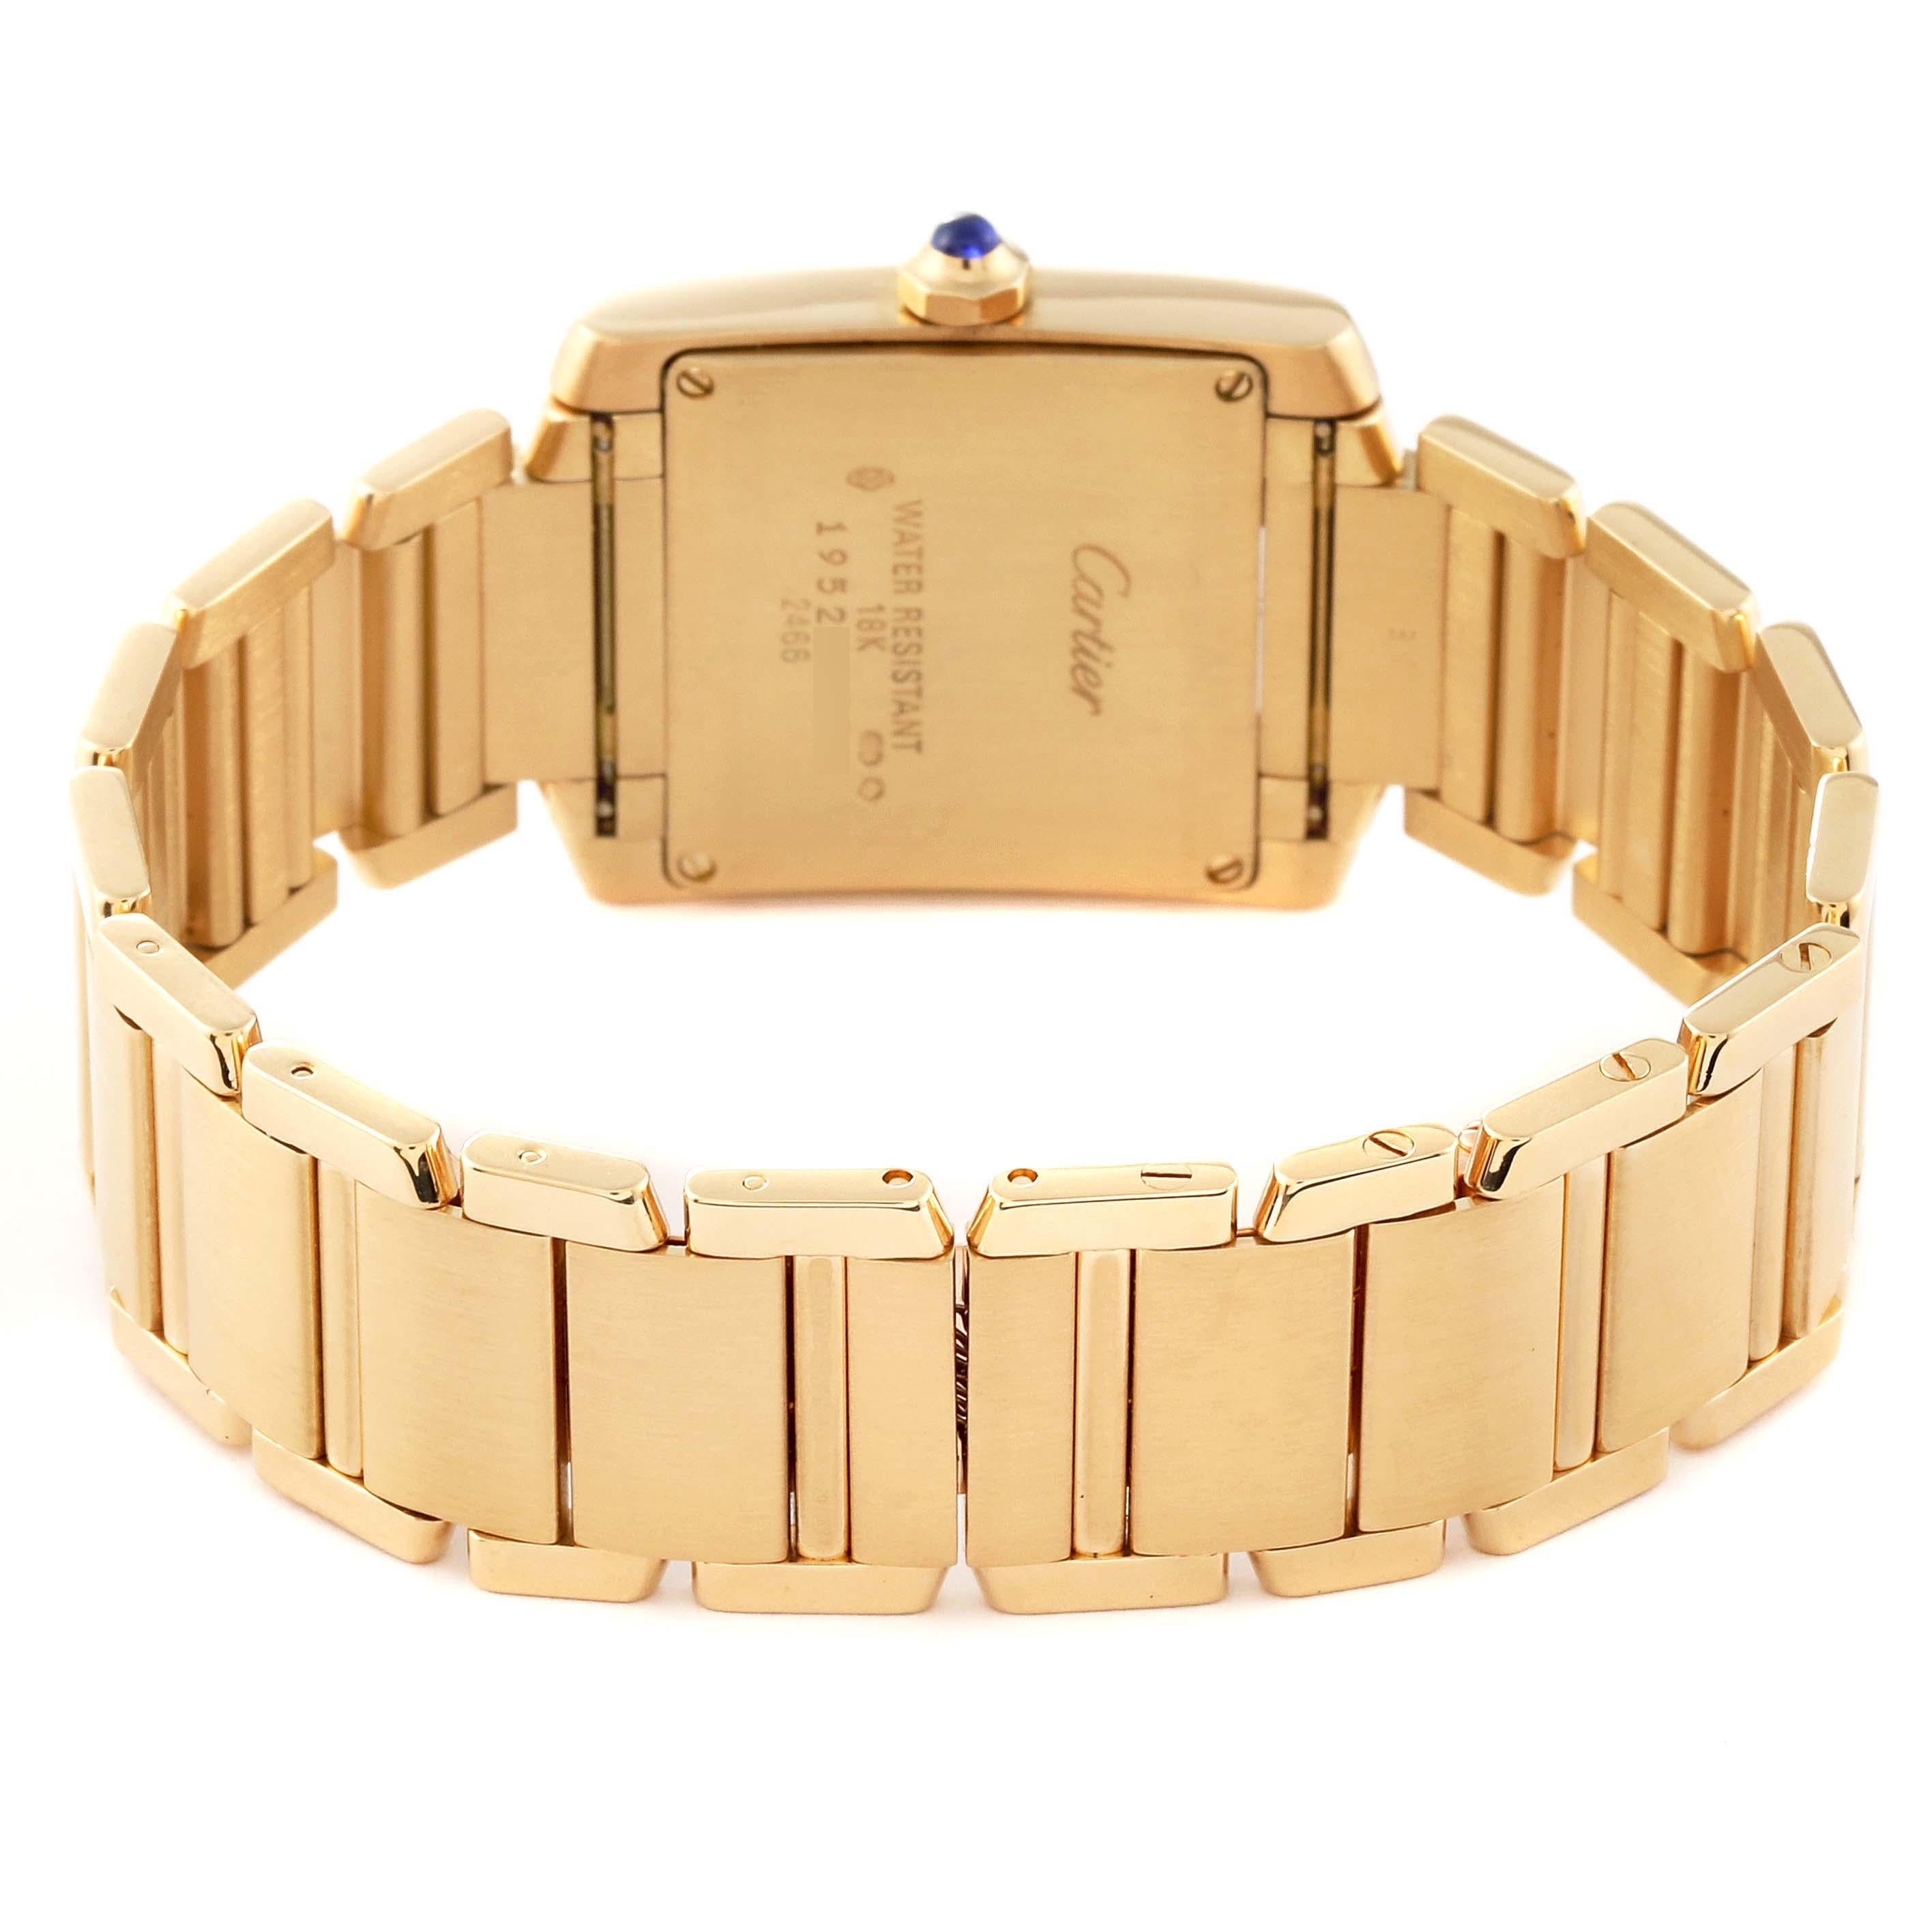 Cartier Tank Francaise Midsize Date Yellow Gold Ladies Watch W50014N2 For Sale 1